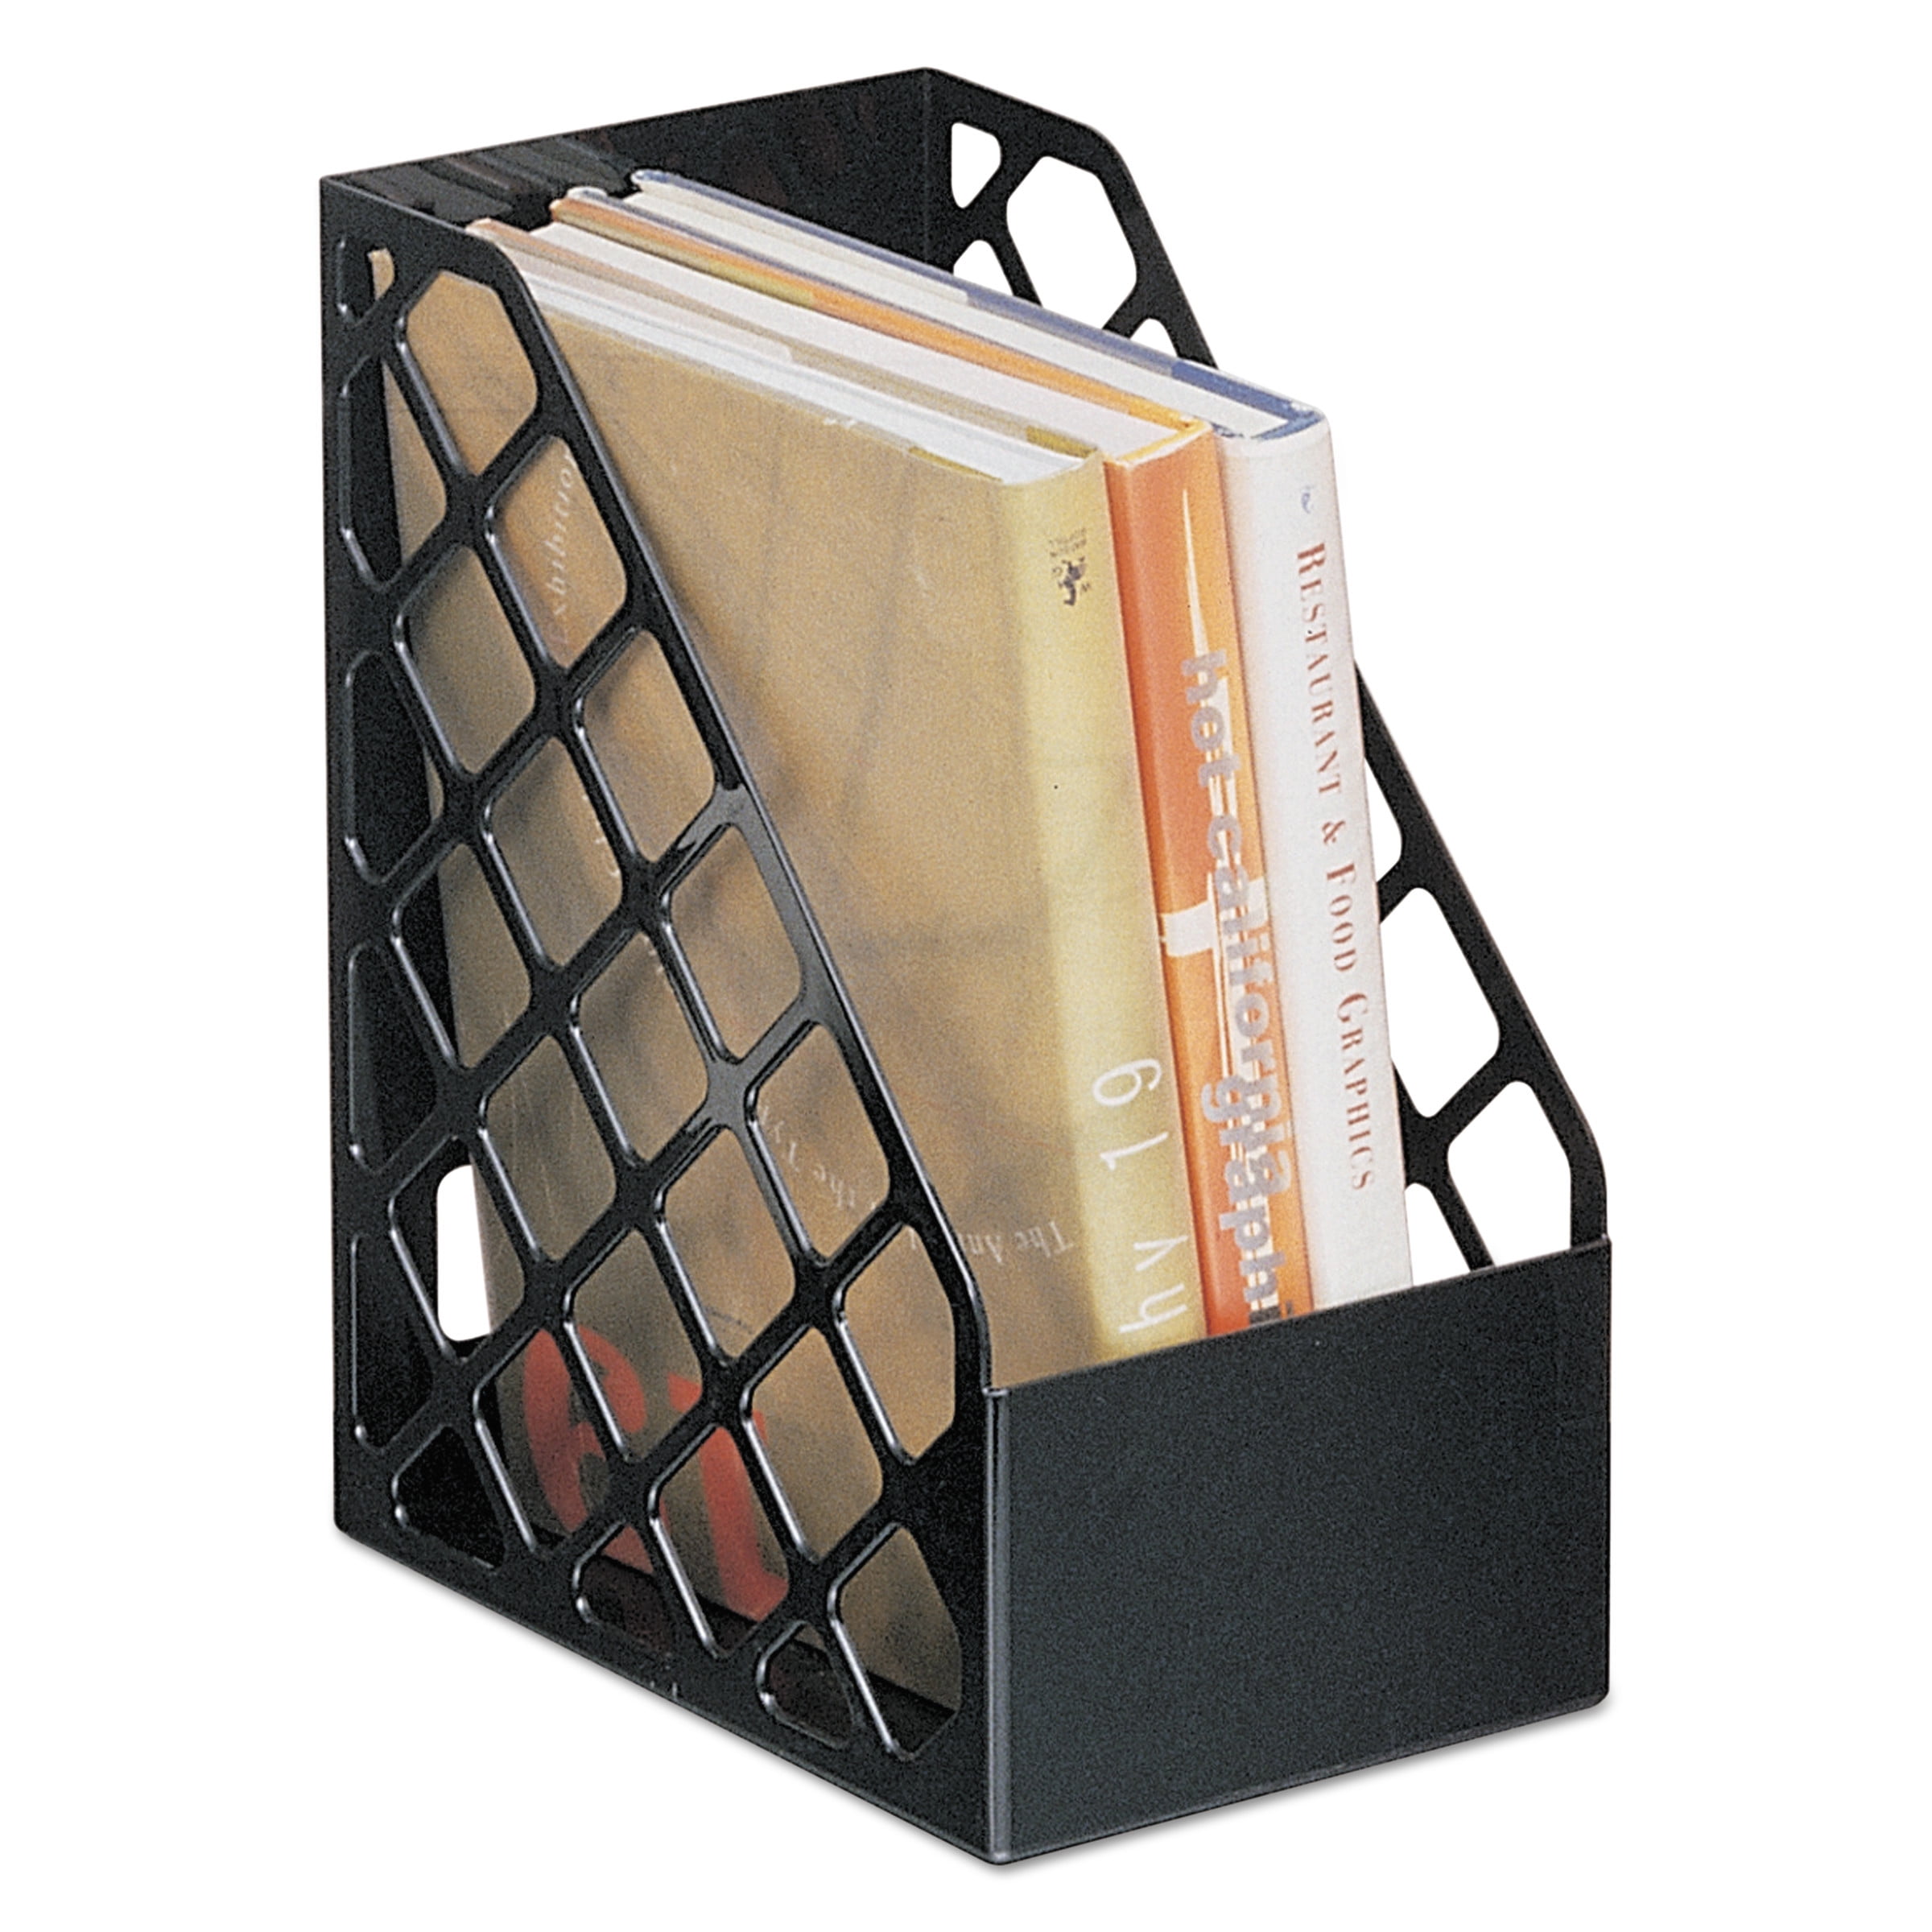 Rubbermaid 96502ROS Optimizers Deluxe Plastic Magazine Rack 5 1/4 x 9 x 11 1/8 Clear 